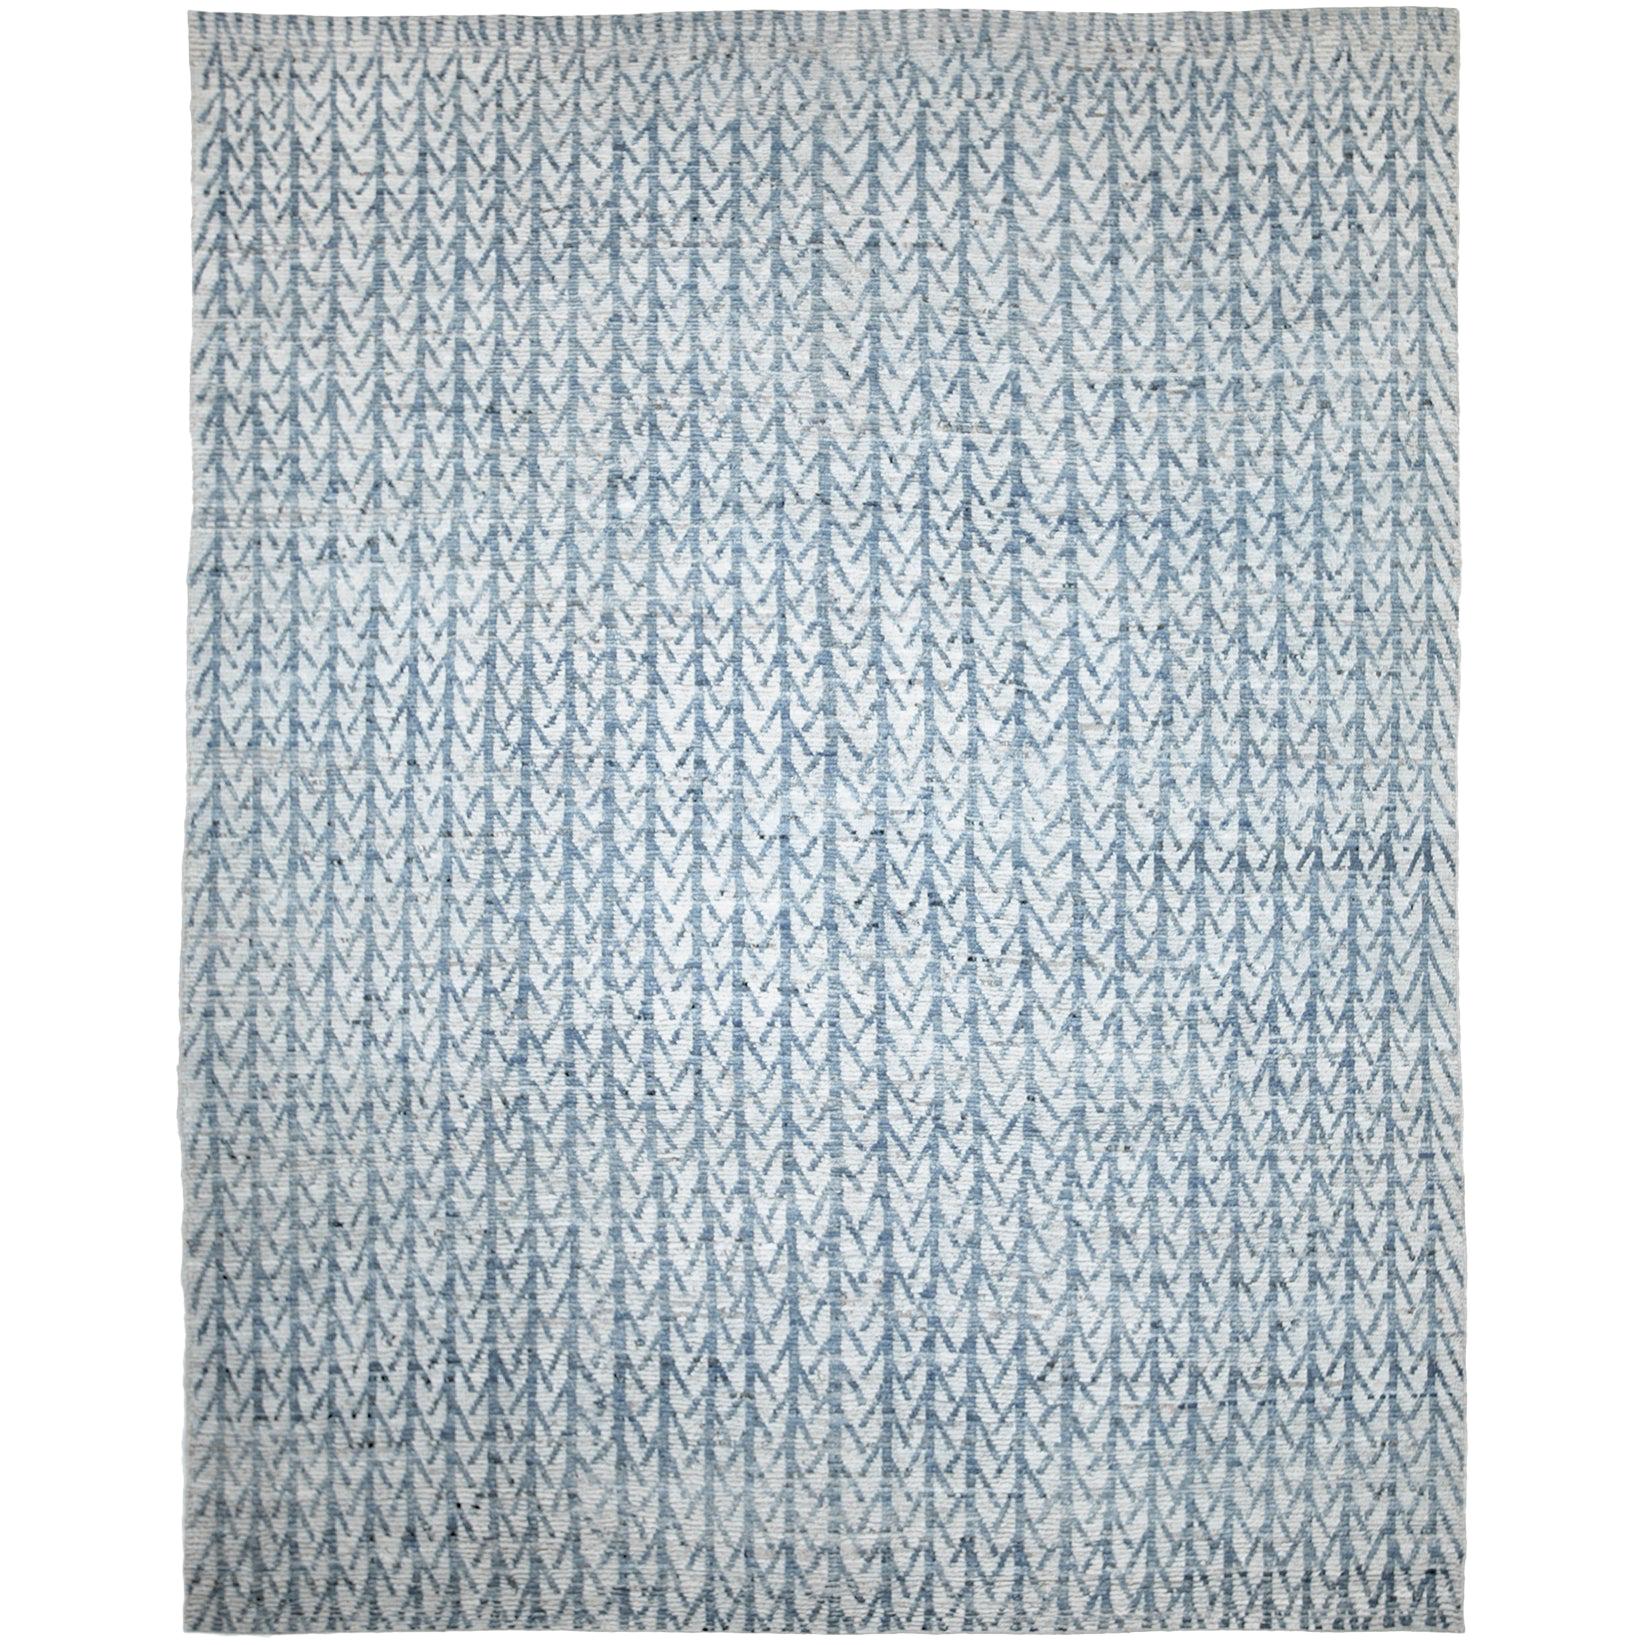 Nazmiyal Collection Light Blue Modern Moroccan Style Rug. Size 9 ft x 11 ft 4 in